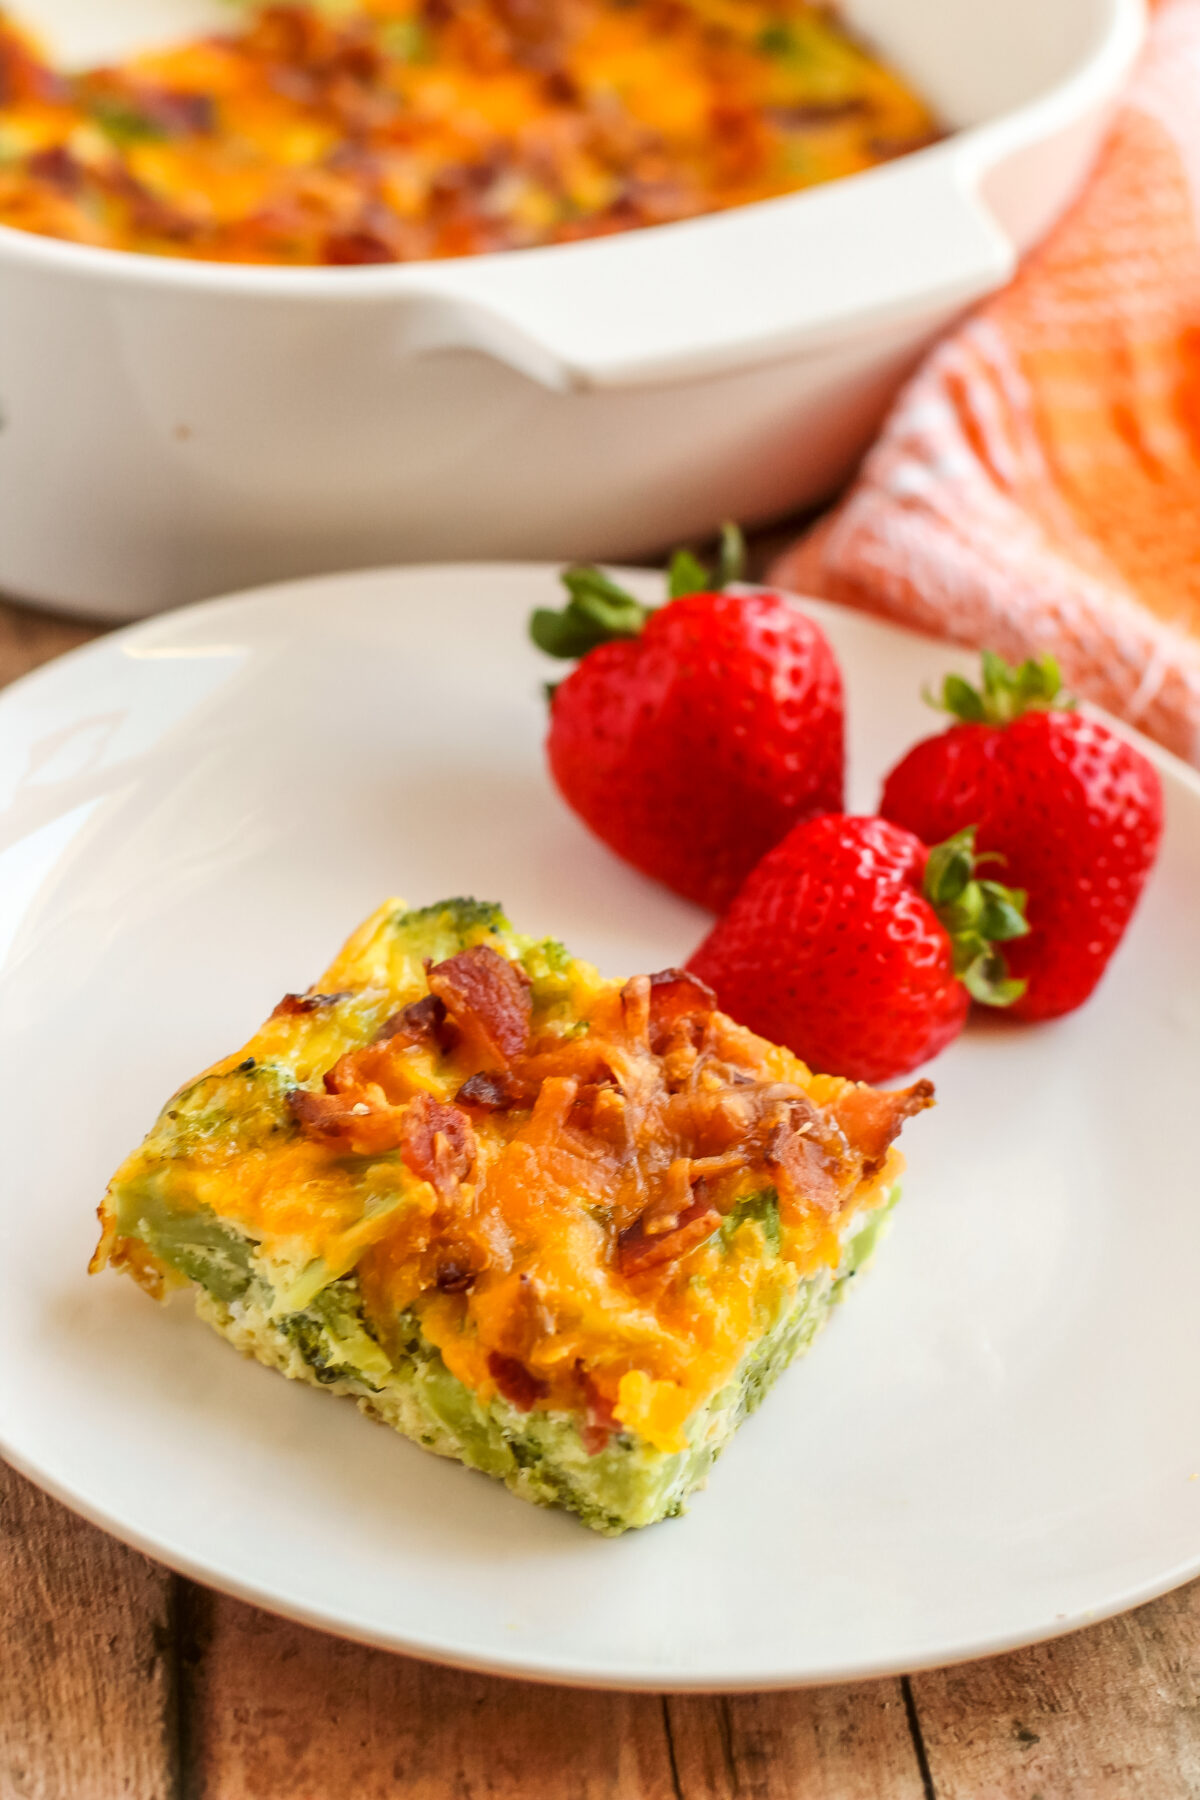 This keto overnight breakfast casserole recipe is the best way to start your day. It's also low carb, gluten free and super easy to make!